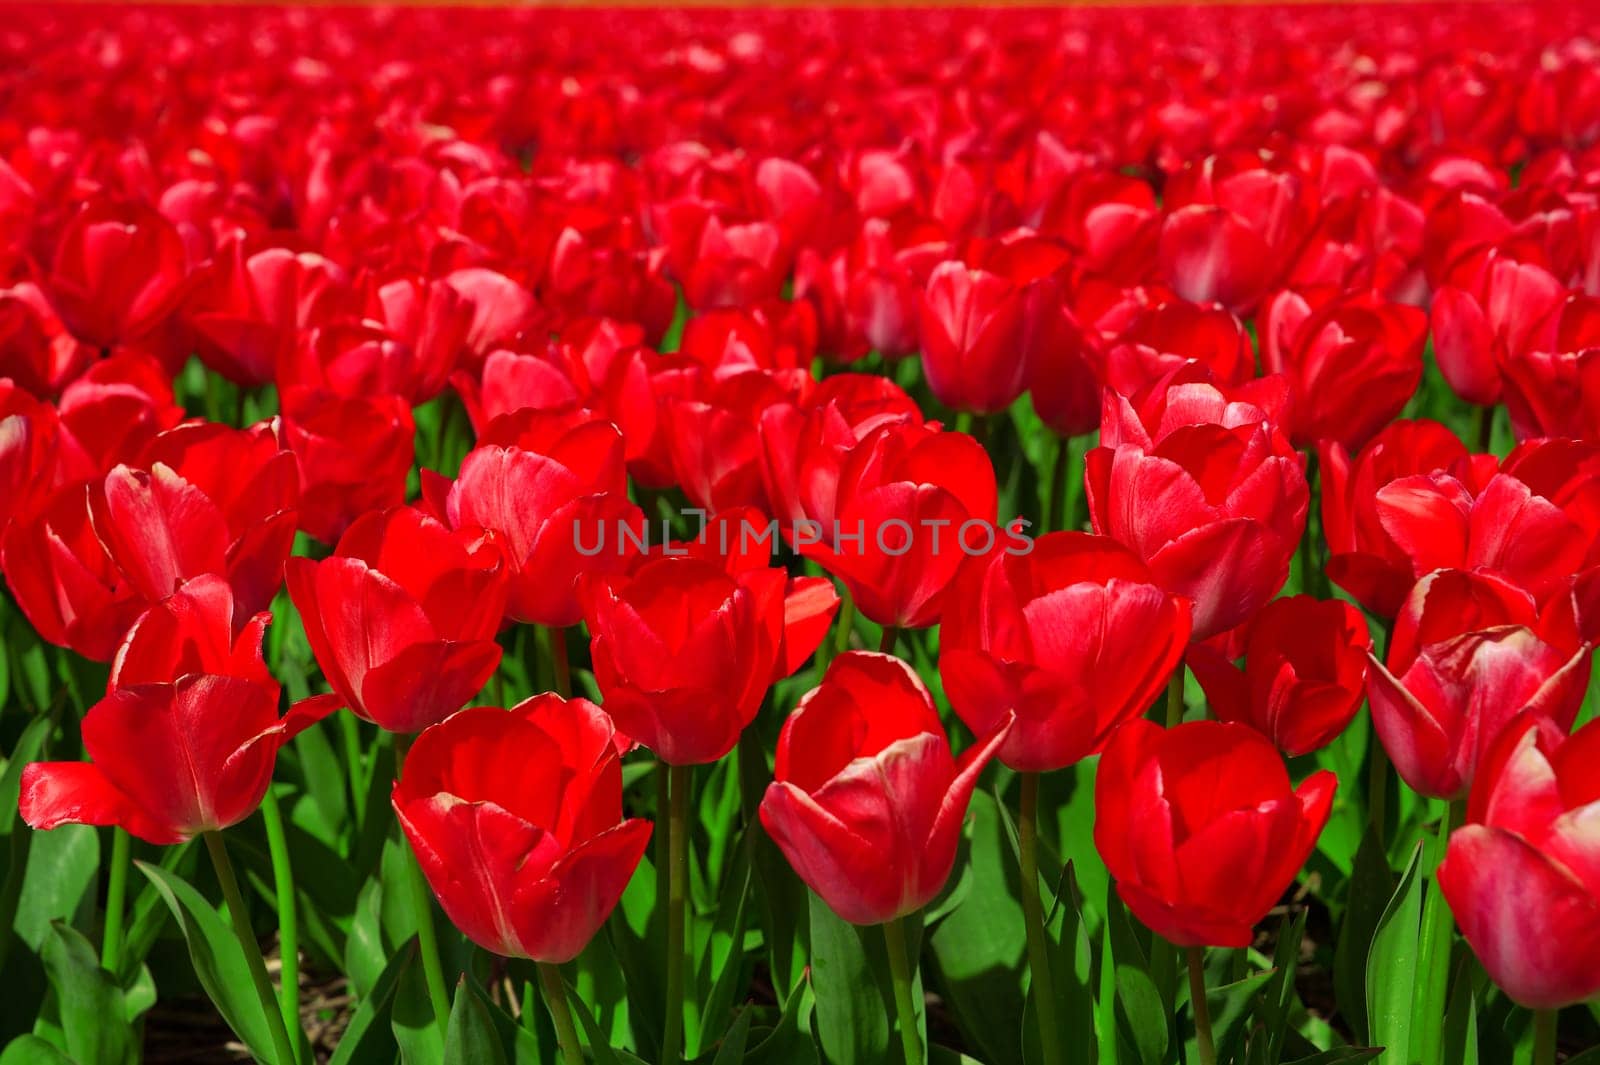 Red tulips blooming in vast springtime field. Beautiful bright red tulip in the middle of a field by PhotoTime